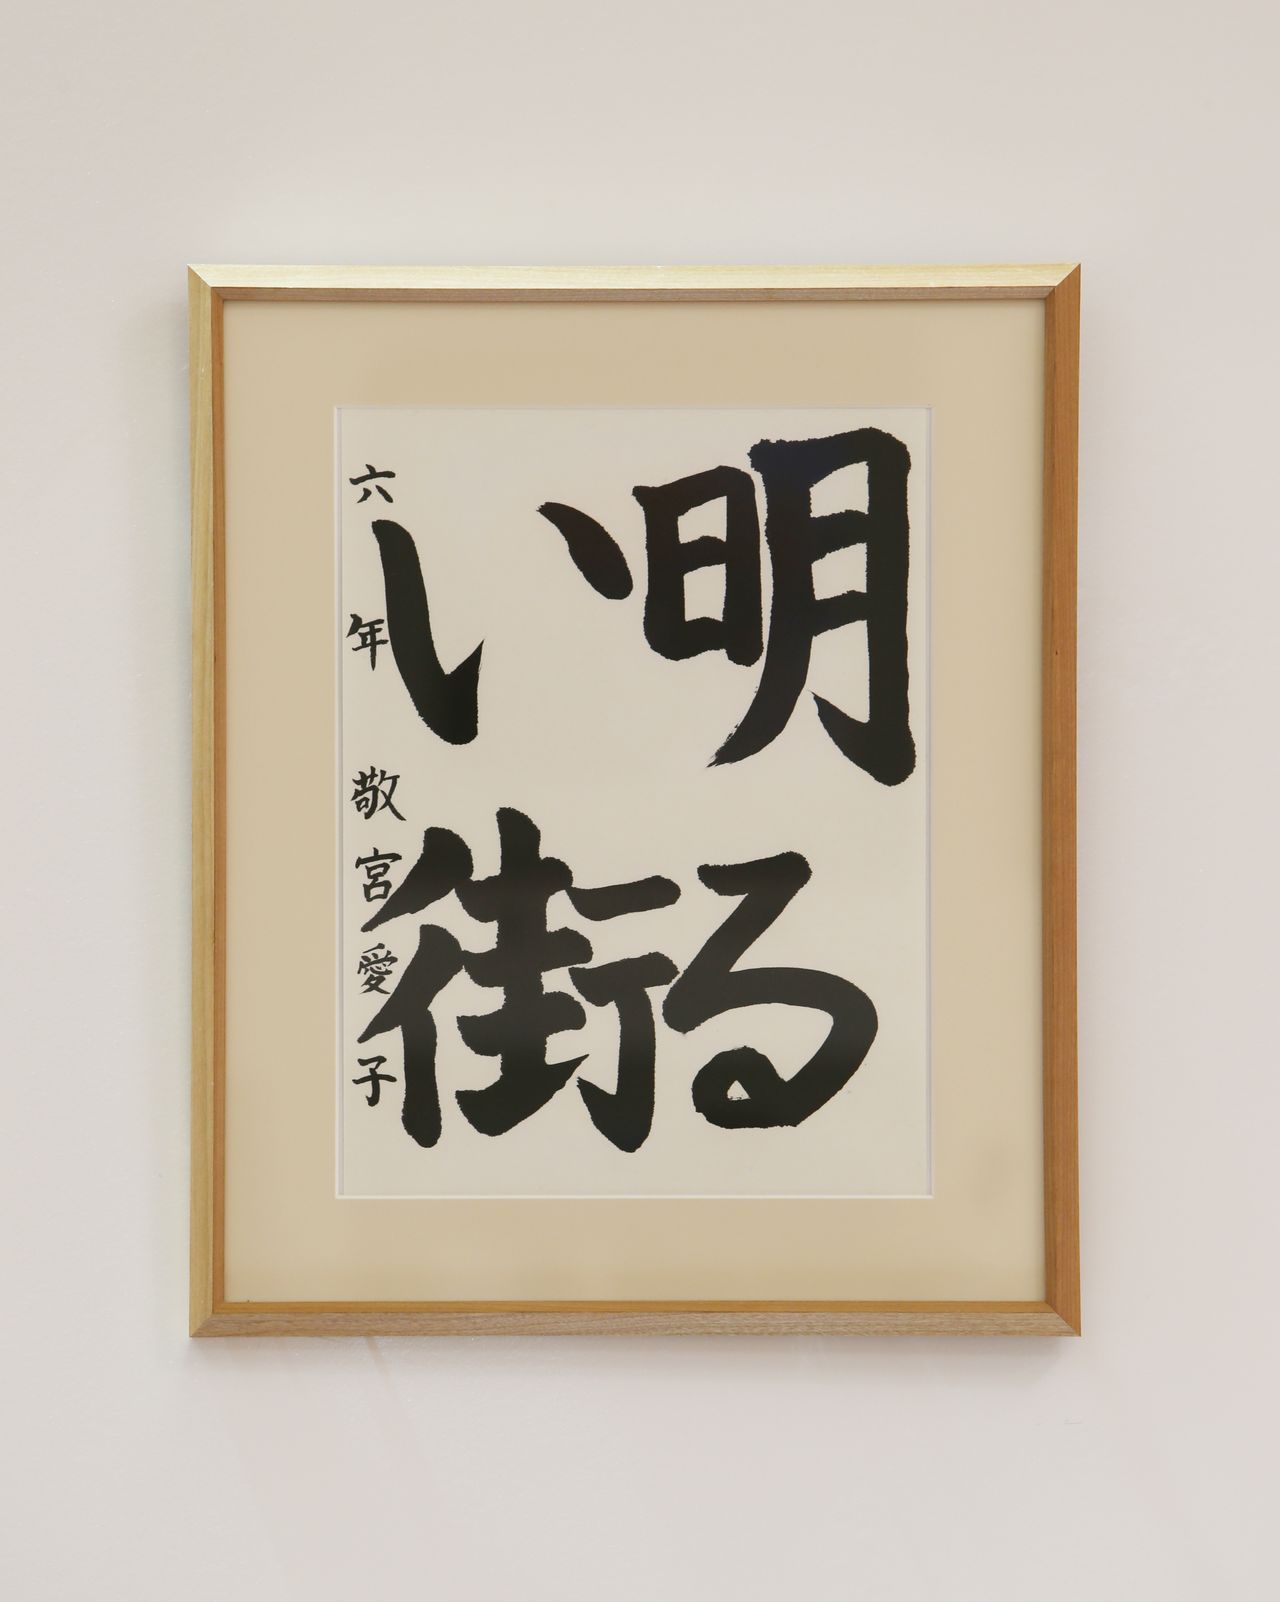 Princess Aiko’s calligraphy entry of the phrase “bright city” in the IHA staff culture and art festival in December 2013. (© Jiji)